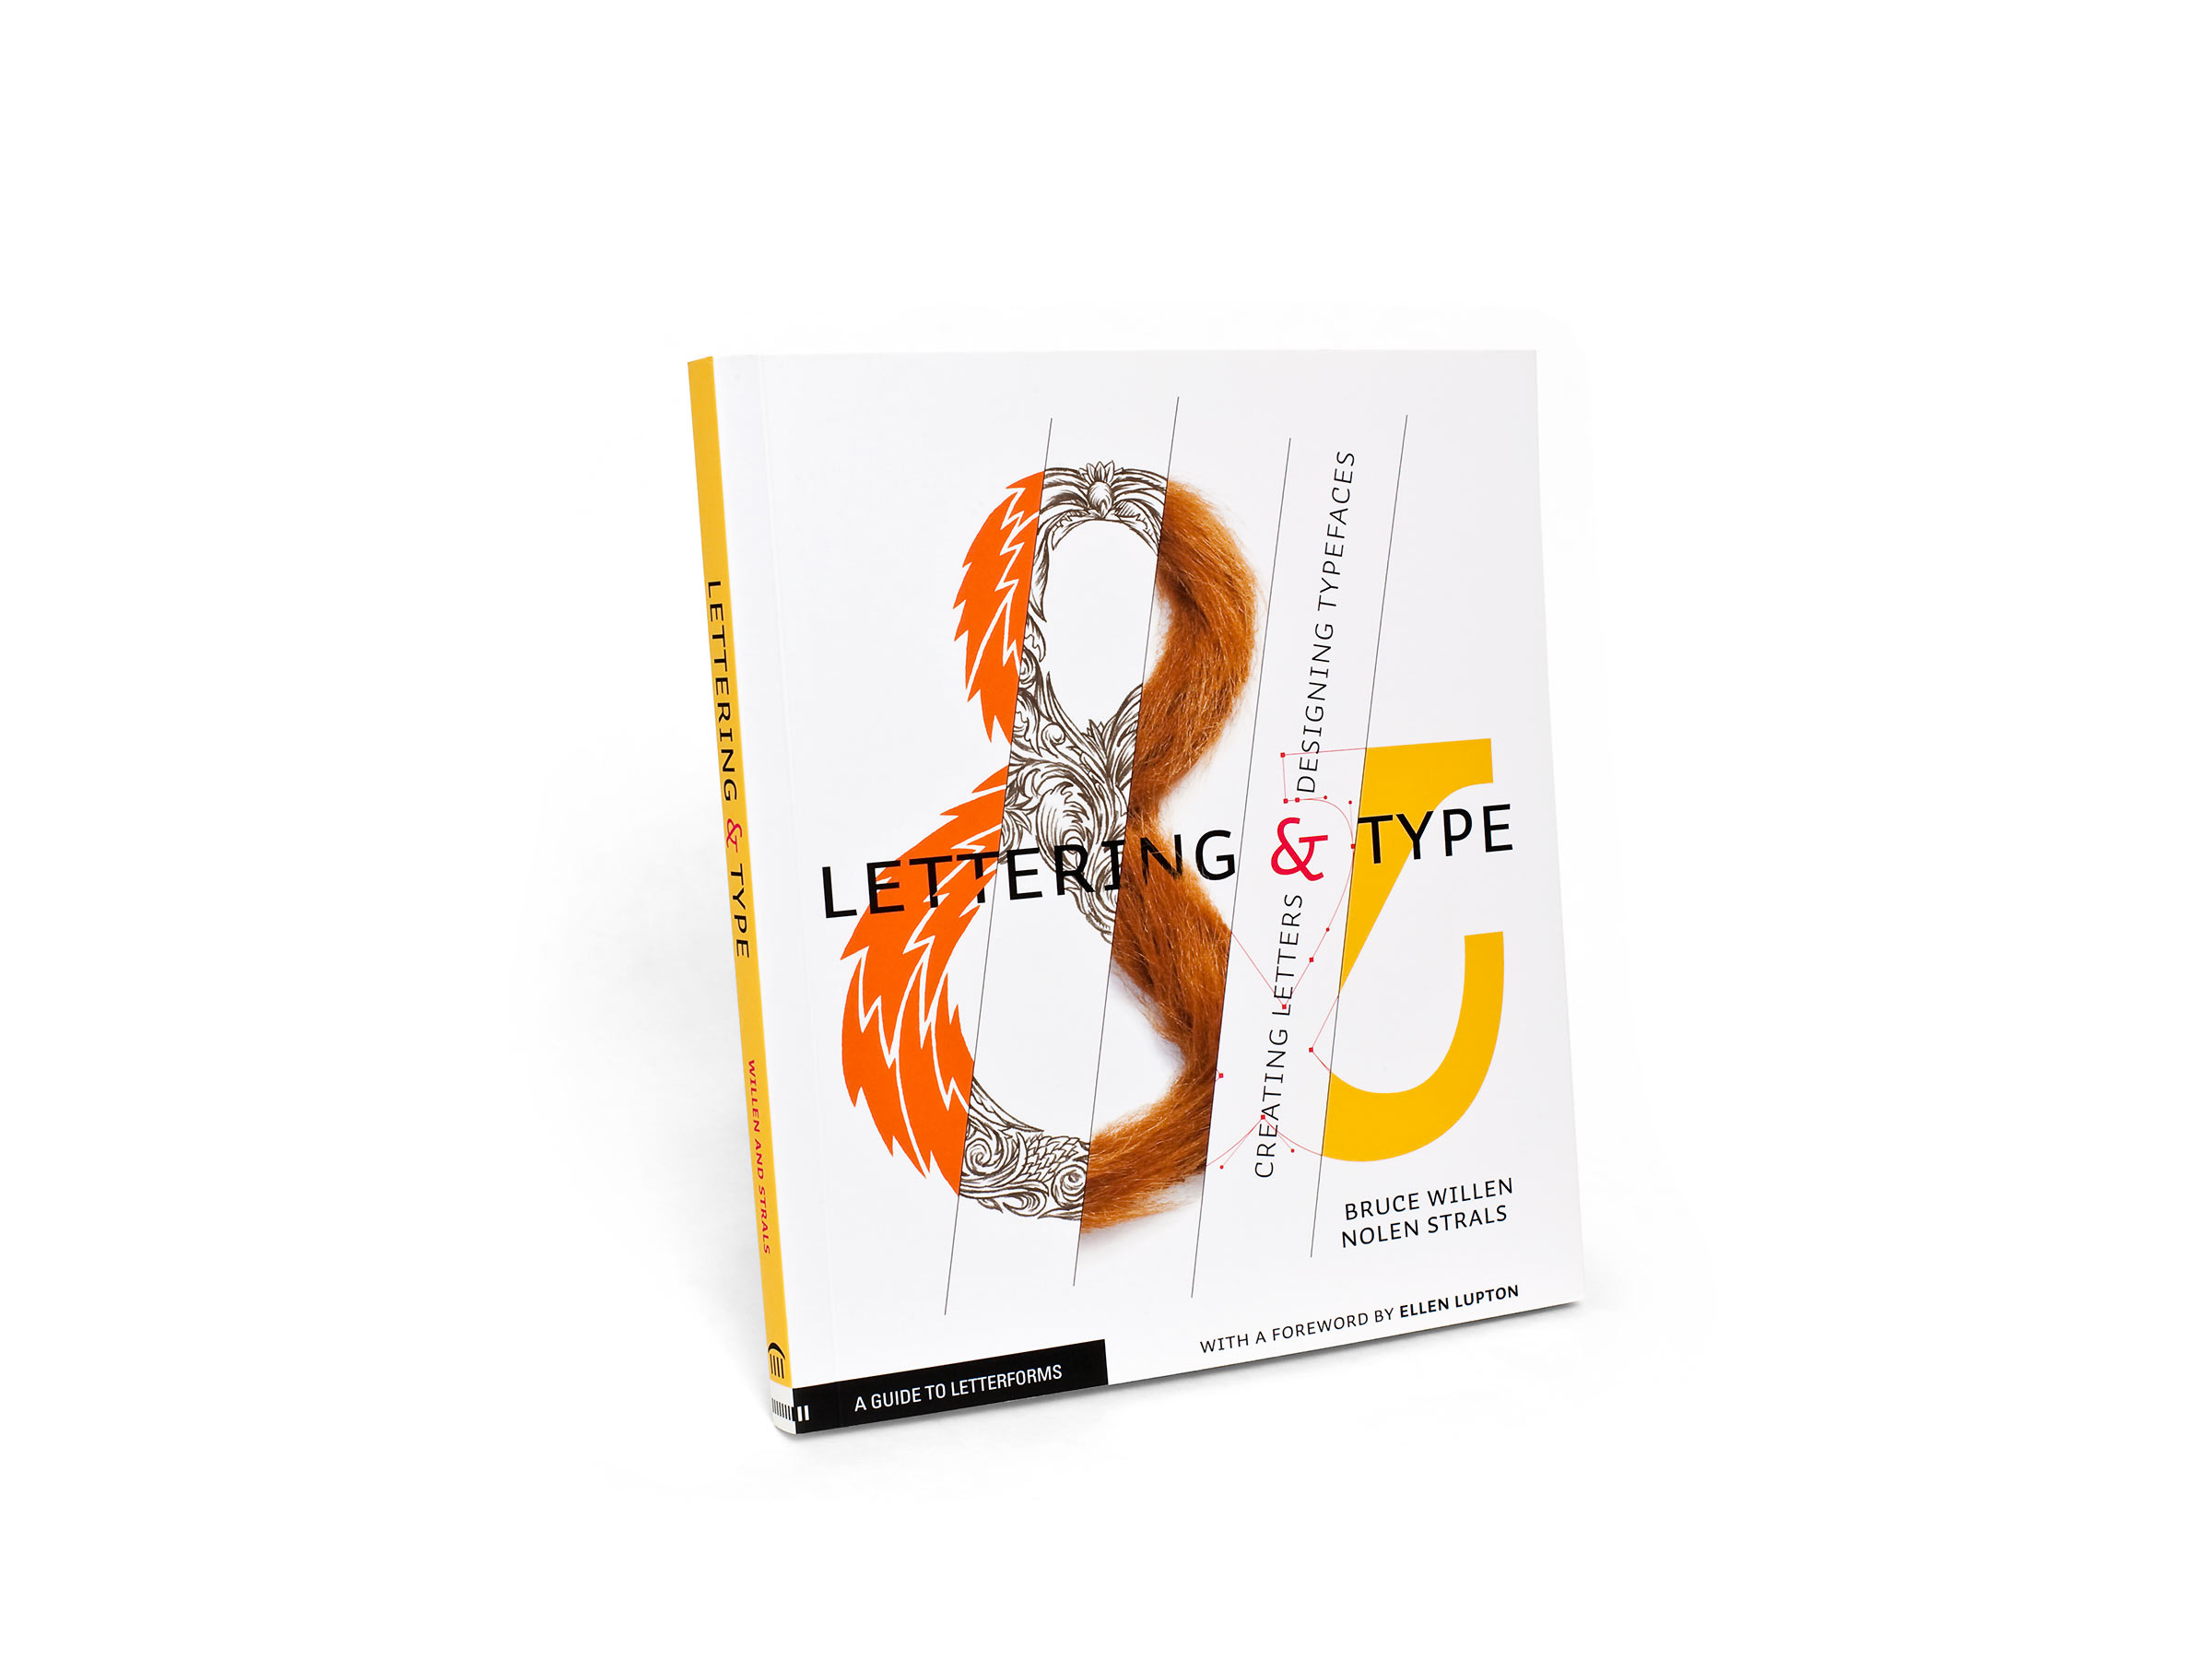 Lettering & Type: Creating Letters and Designing Typefaces by Bruce Willen and Nolen Strals